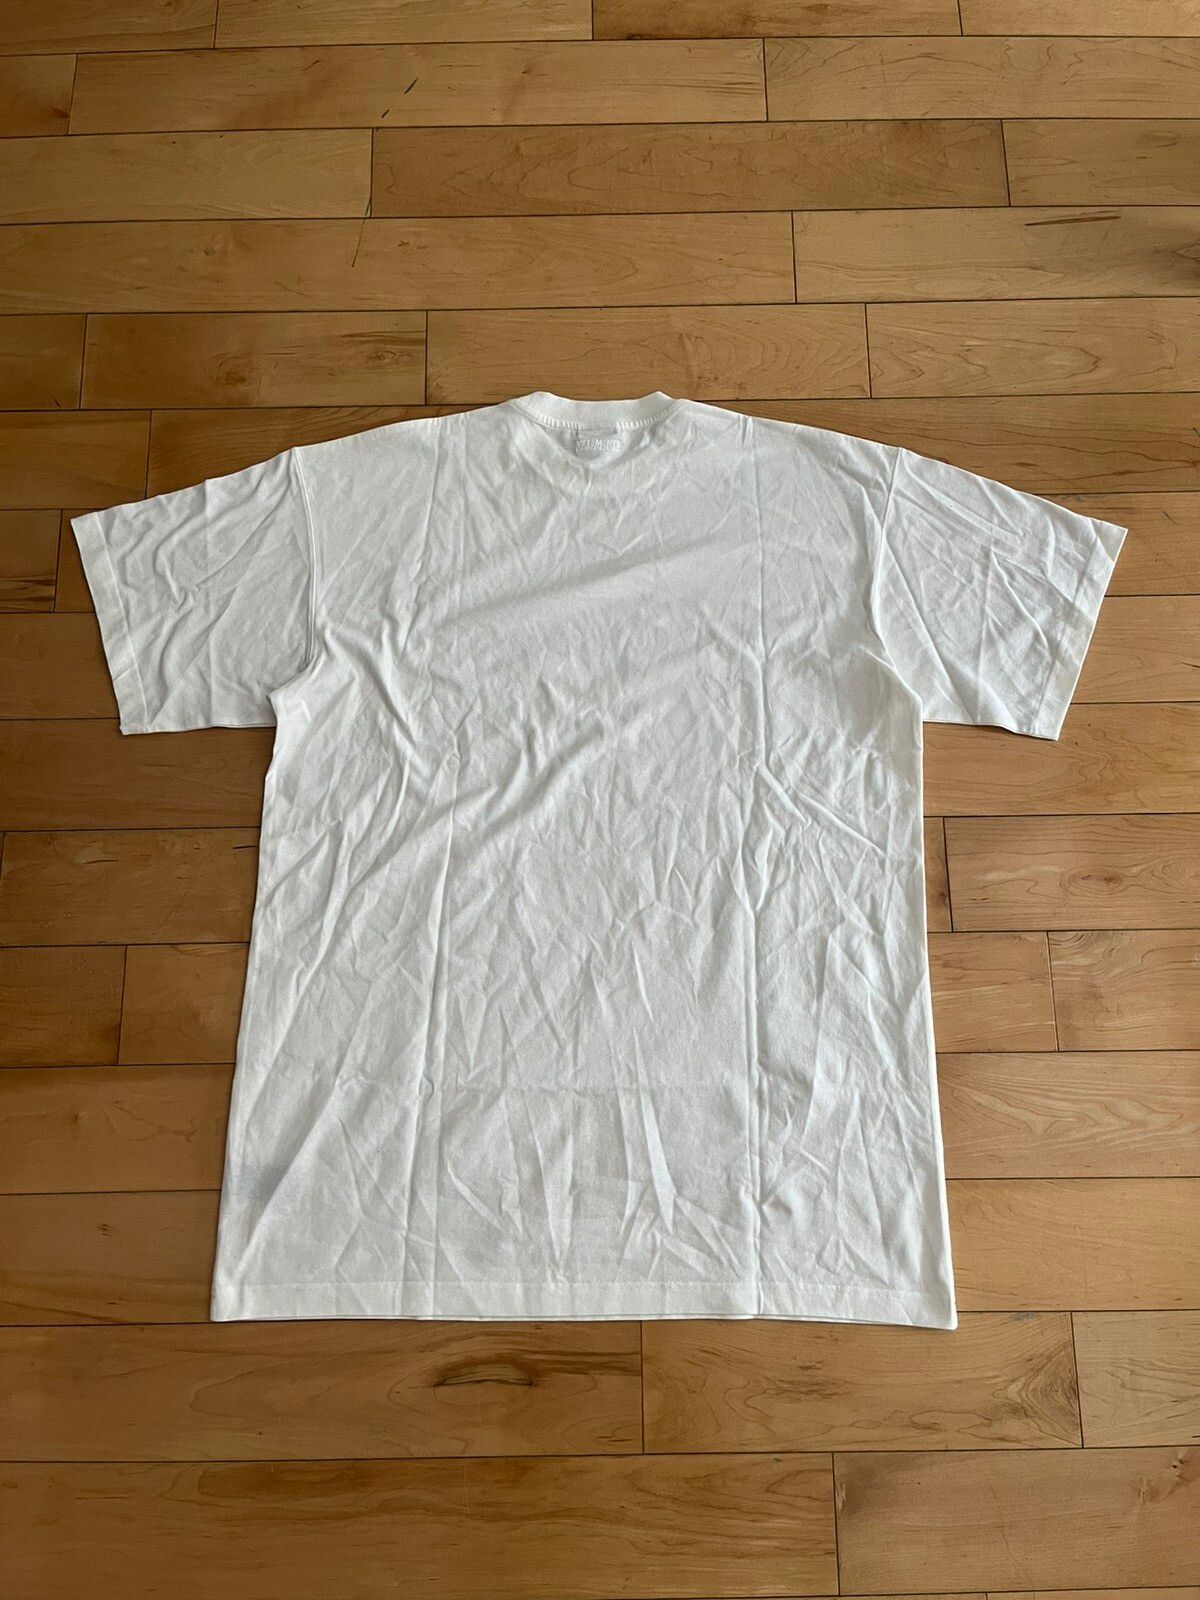 NWT - Vetements "Keeping up with the Gvasalias" T-shirt - 3